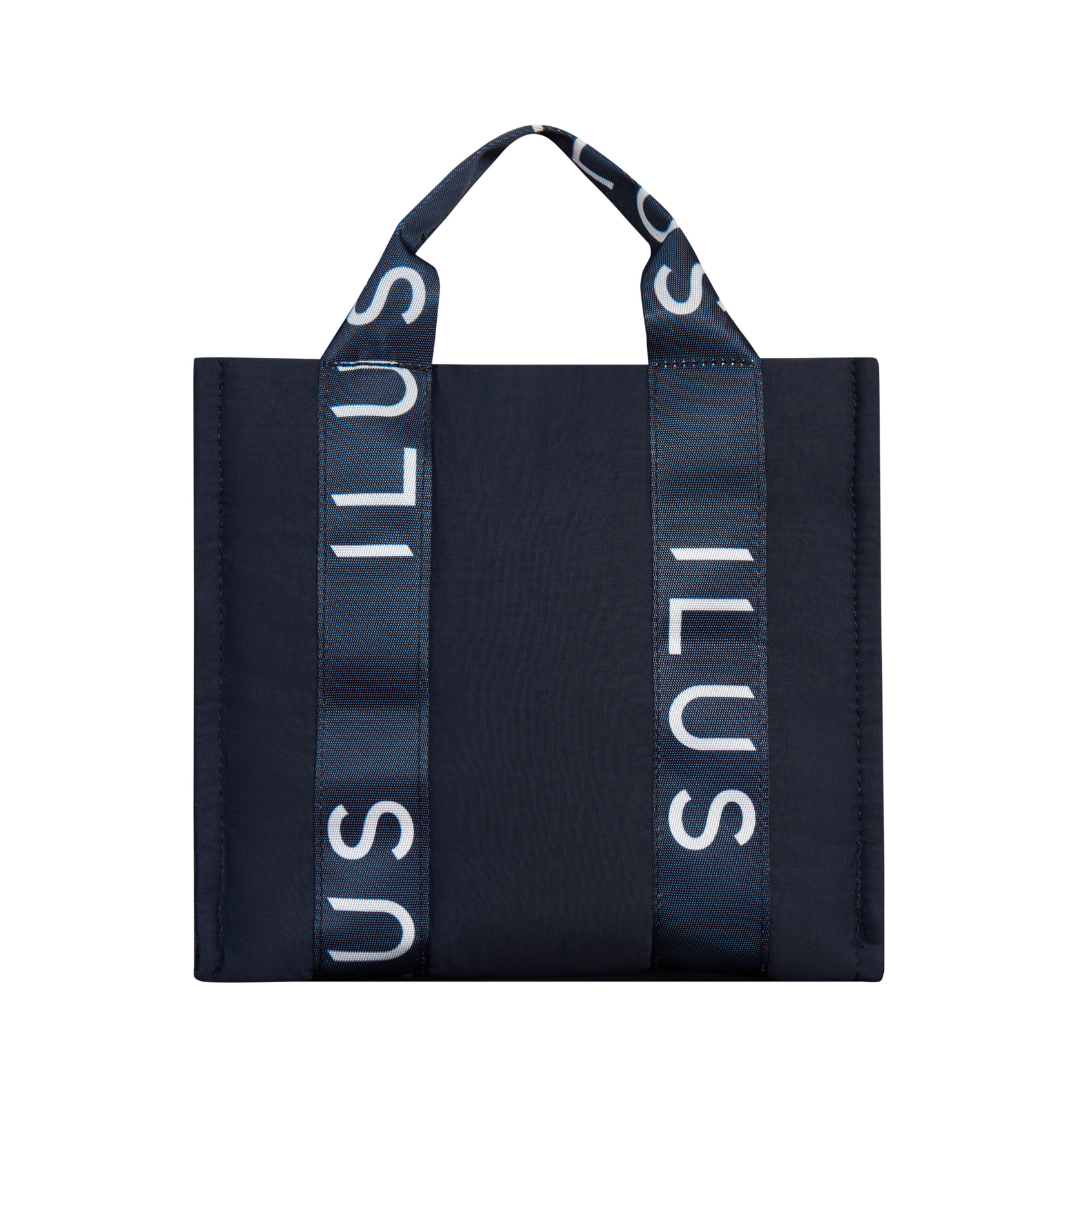 Highsnobiety – Not in Paris 5 Mini Canvas Tote Bag - One Size